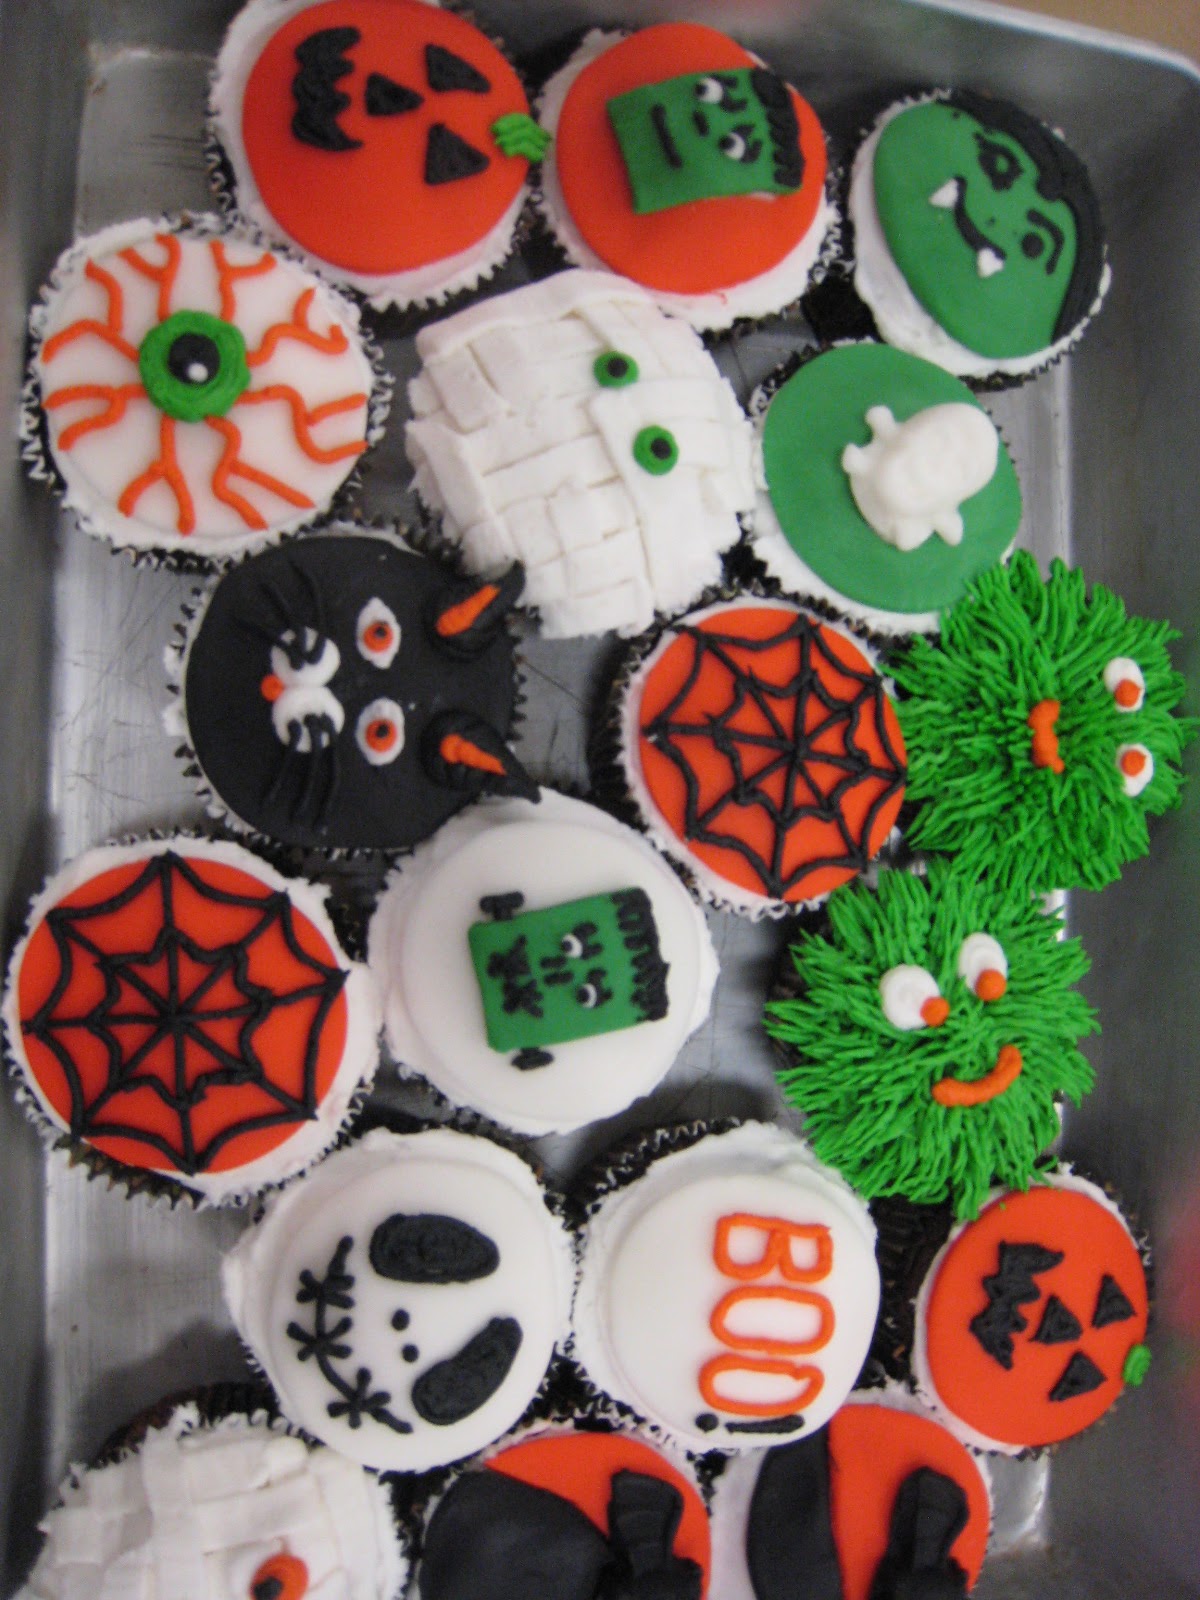 10 Photos of Decorate Halloween Cupcakes And Cakes